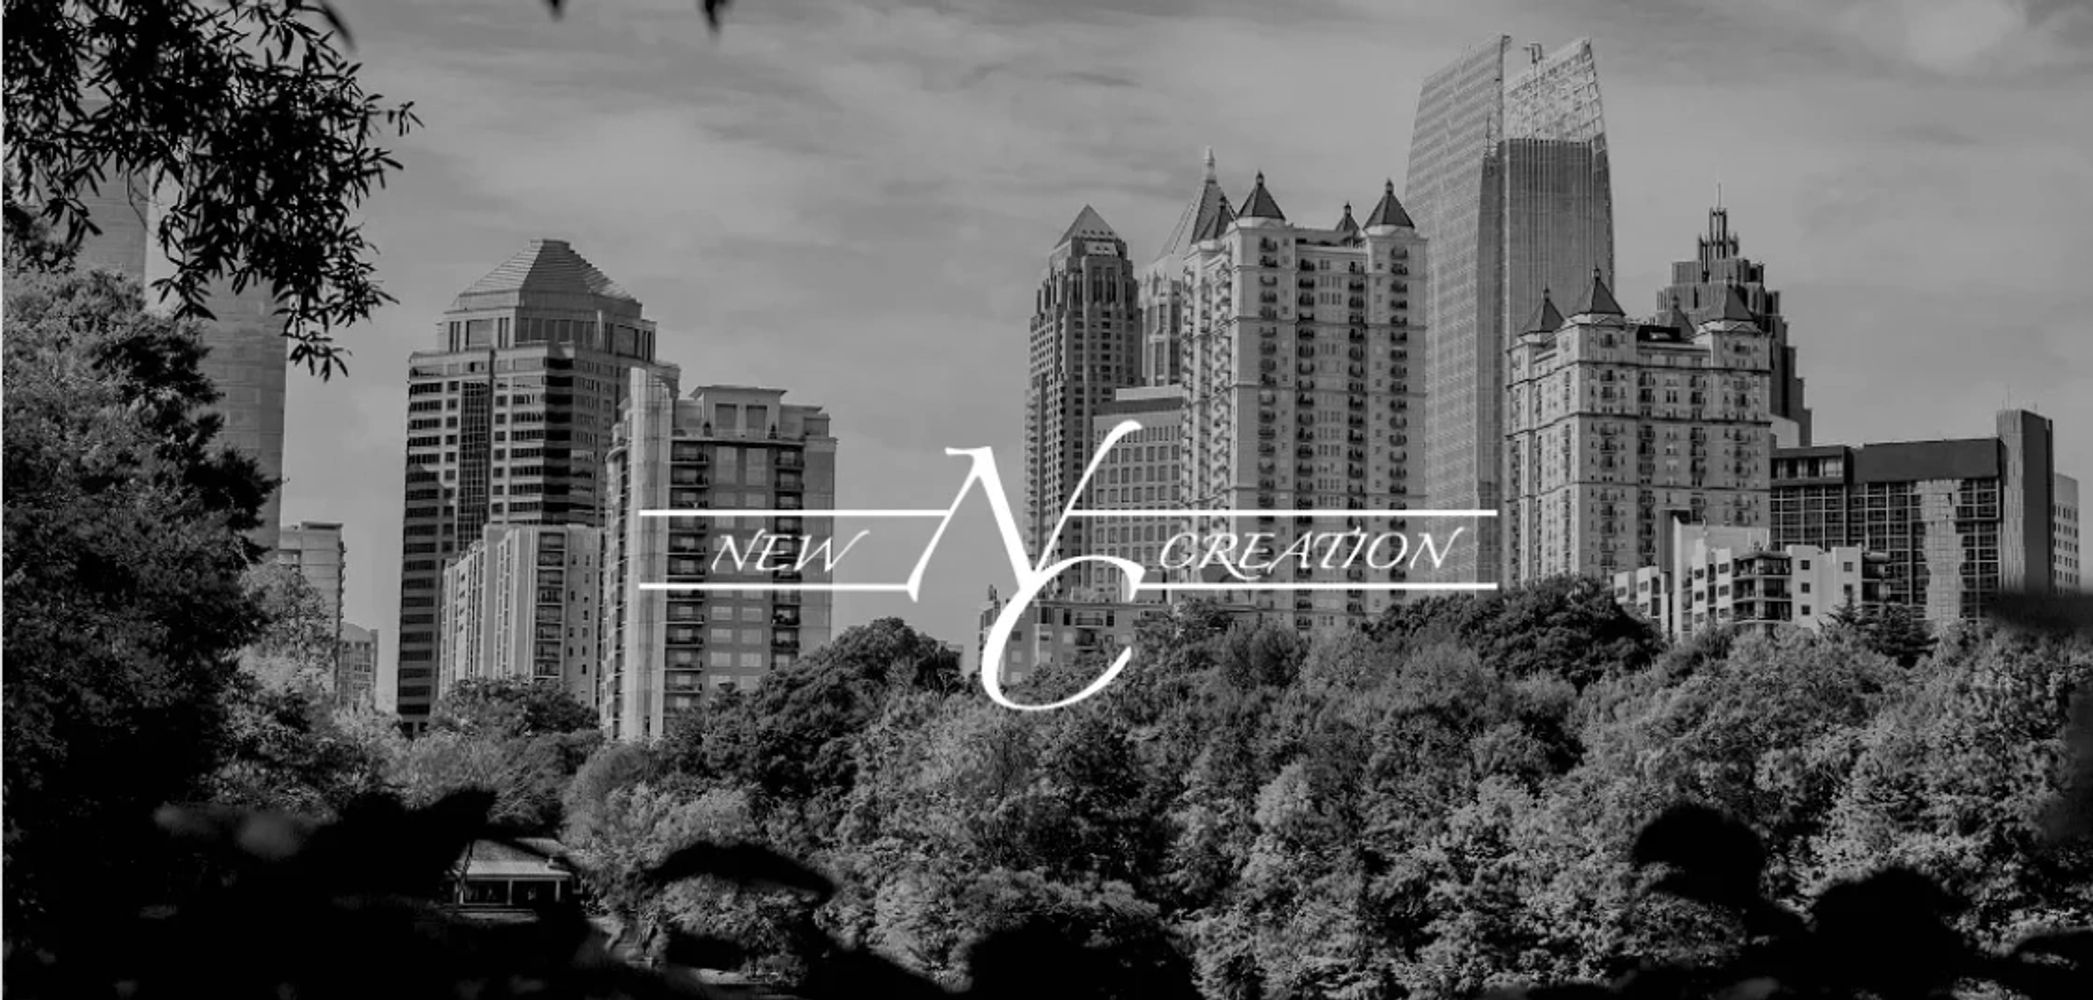 New Creation is a Real Estate Investment company that buy, sells, and rents homes in metro Atlanta.